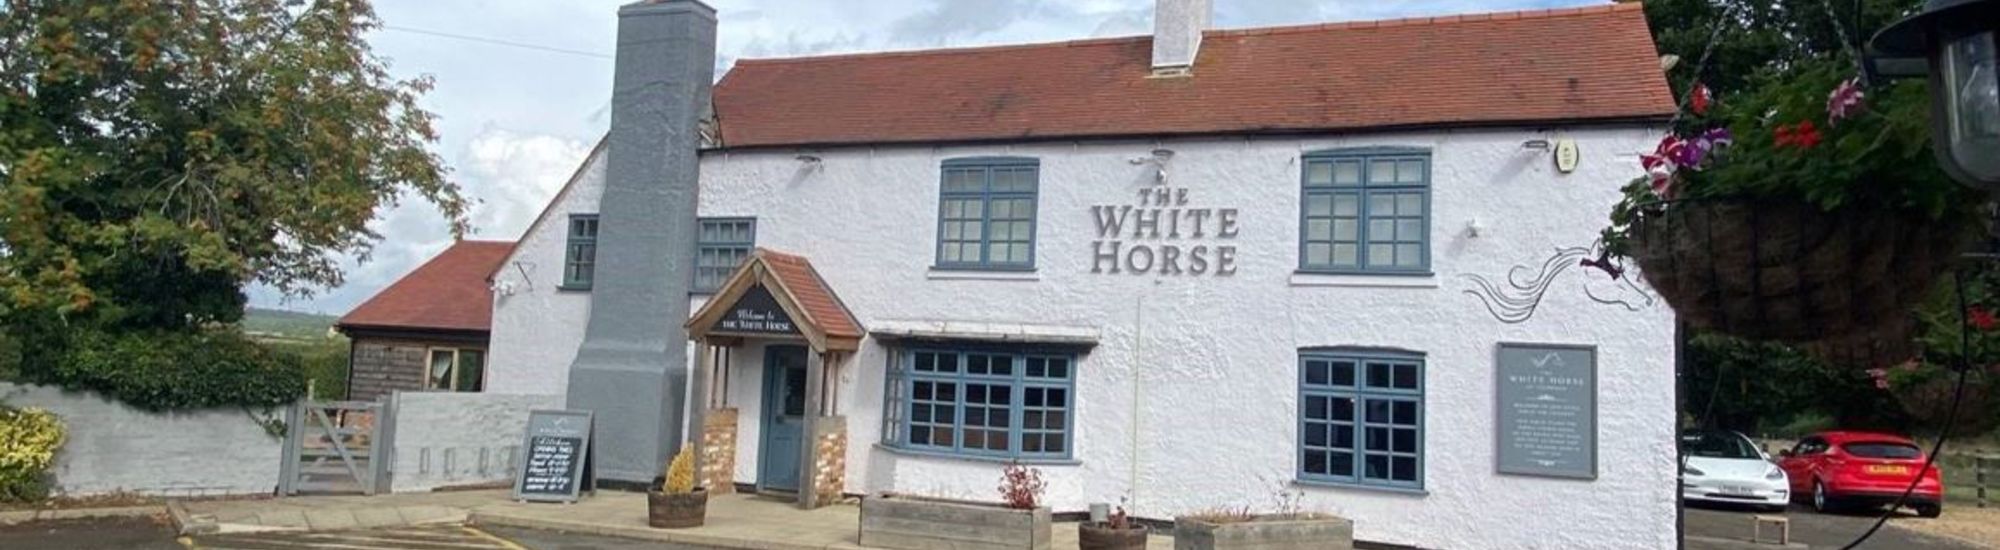 The White Horse, Lease